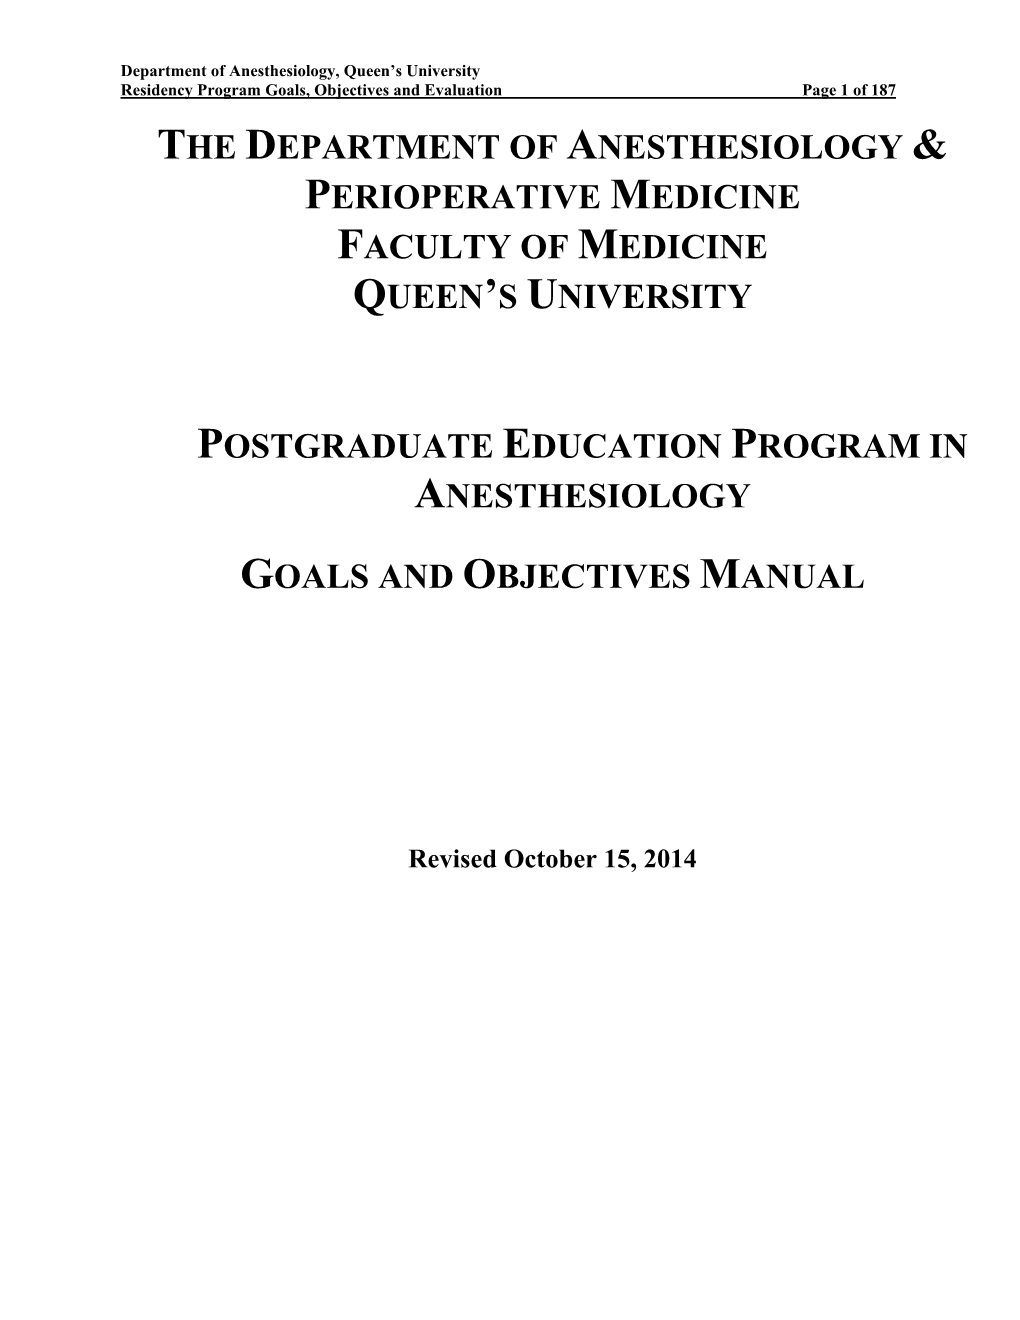 The Department of Anesthesiology & Perioperative Medicine Faculty of Medicine Queen’S University